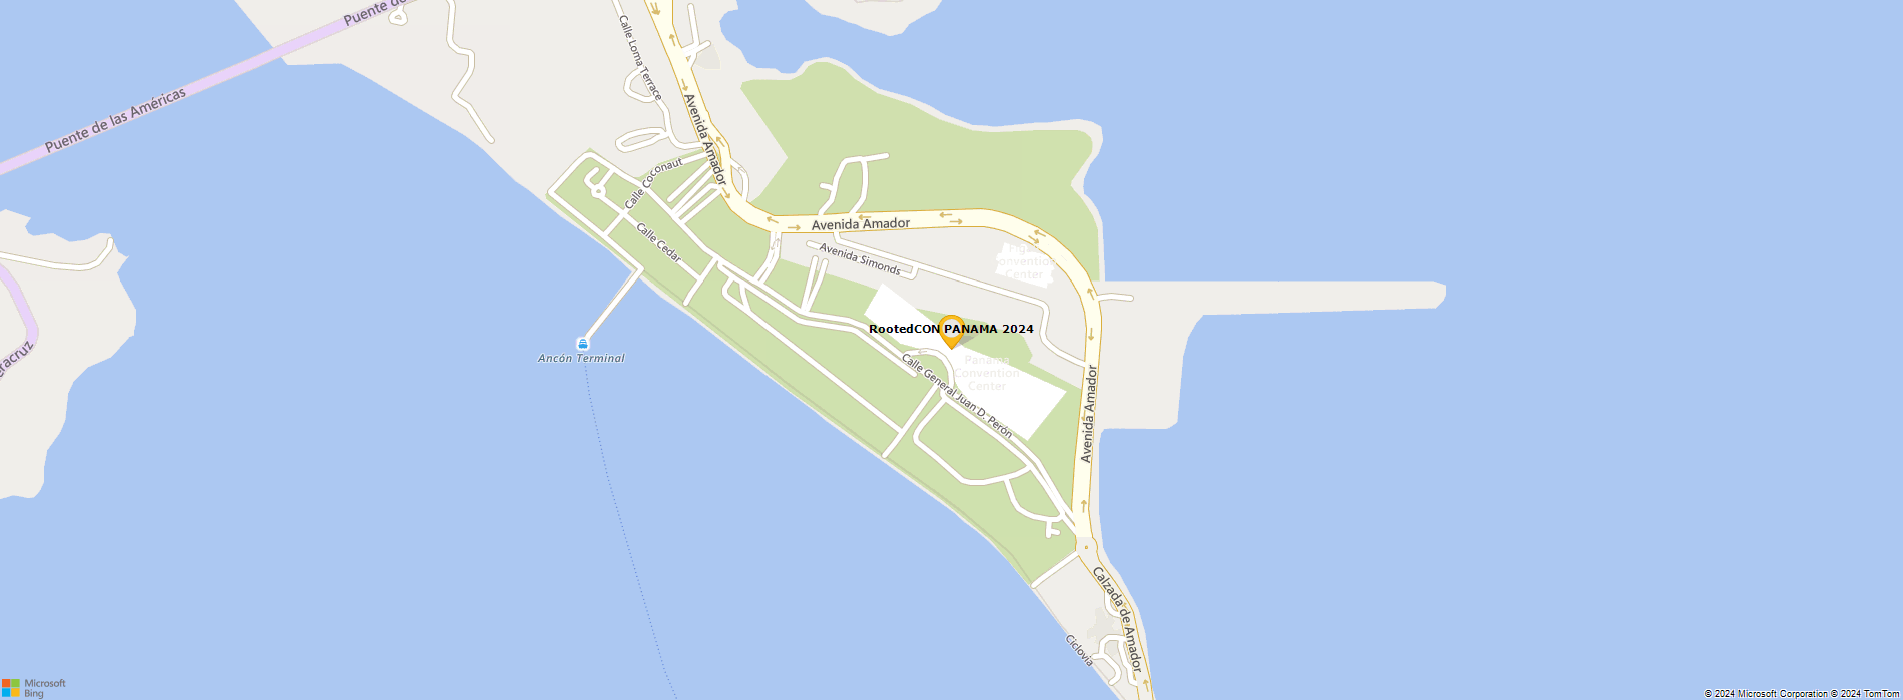 Bing Map of Panama Convention Center